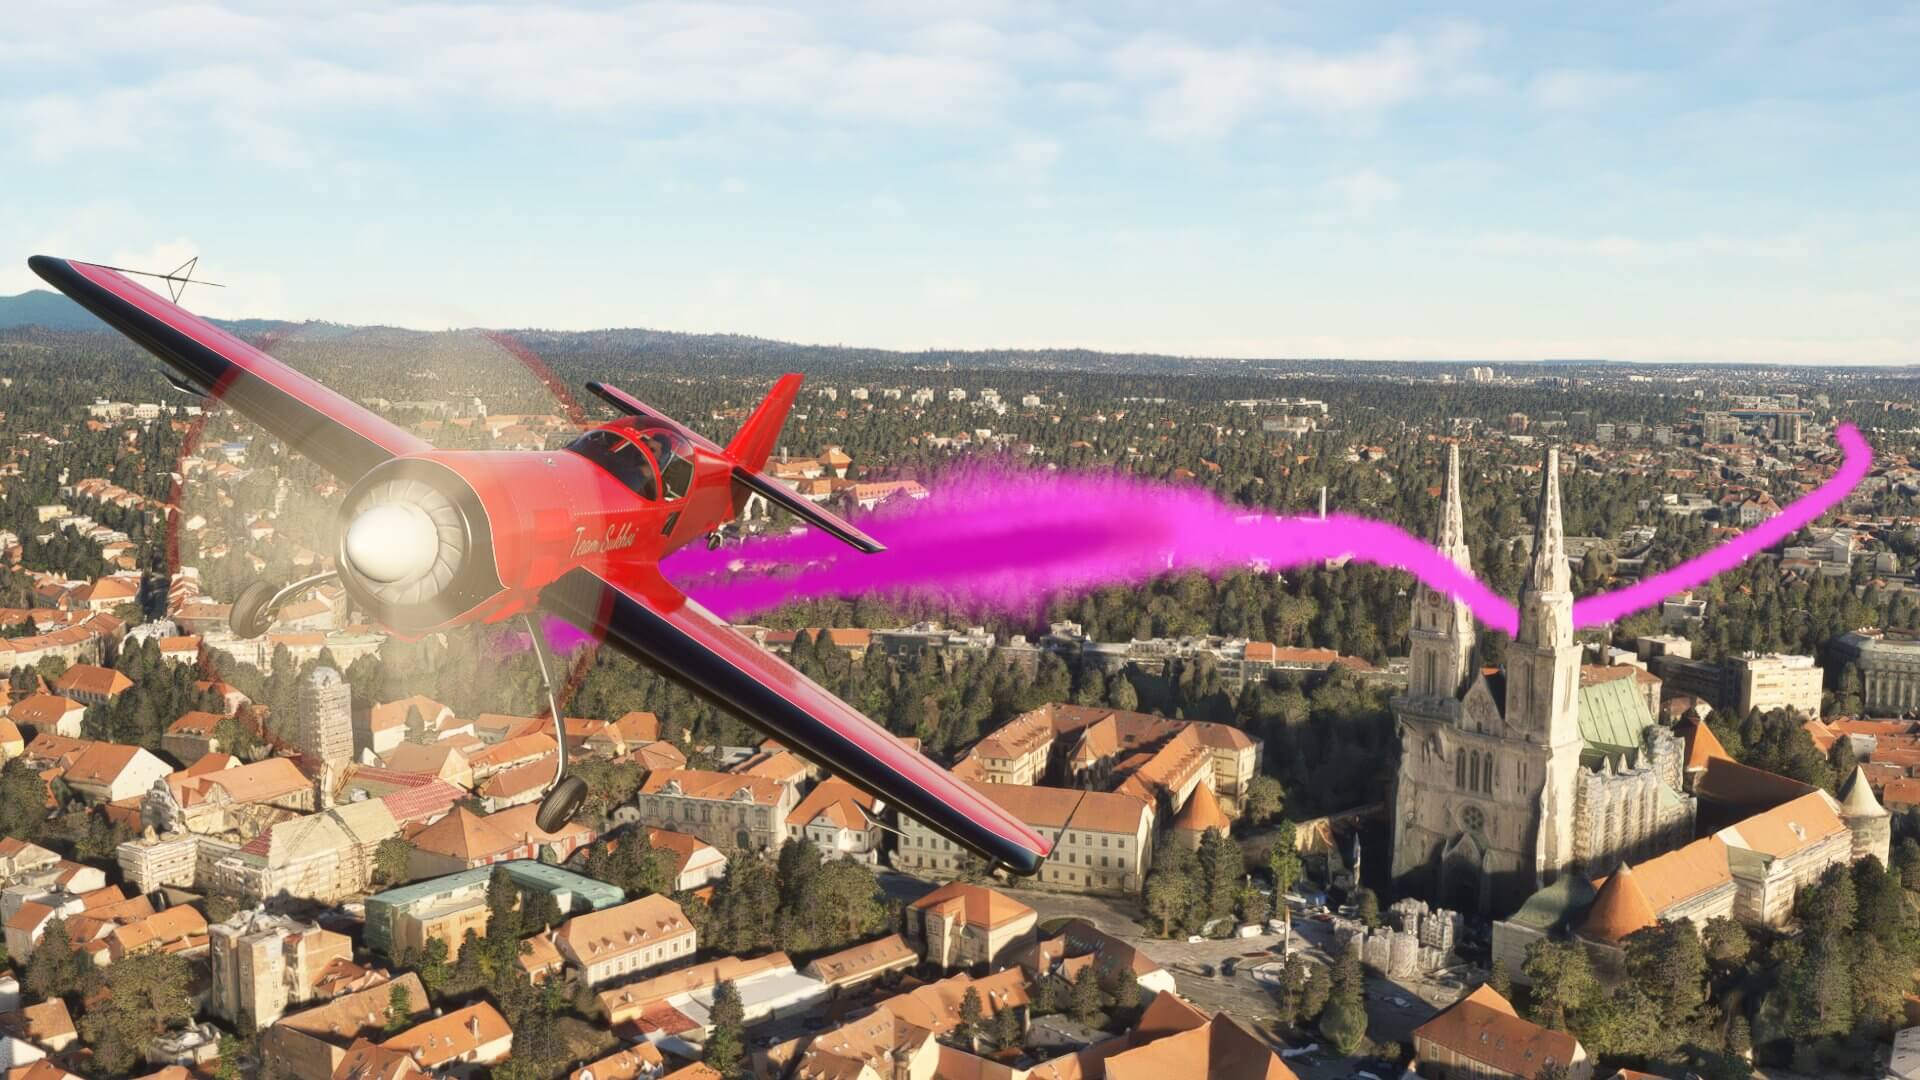 An aerobatic plane with pink smoke plumes through the spires of a Cathedral